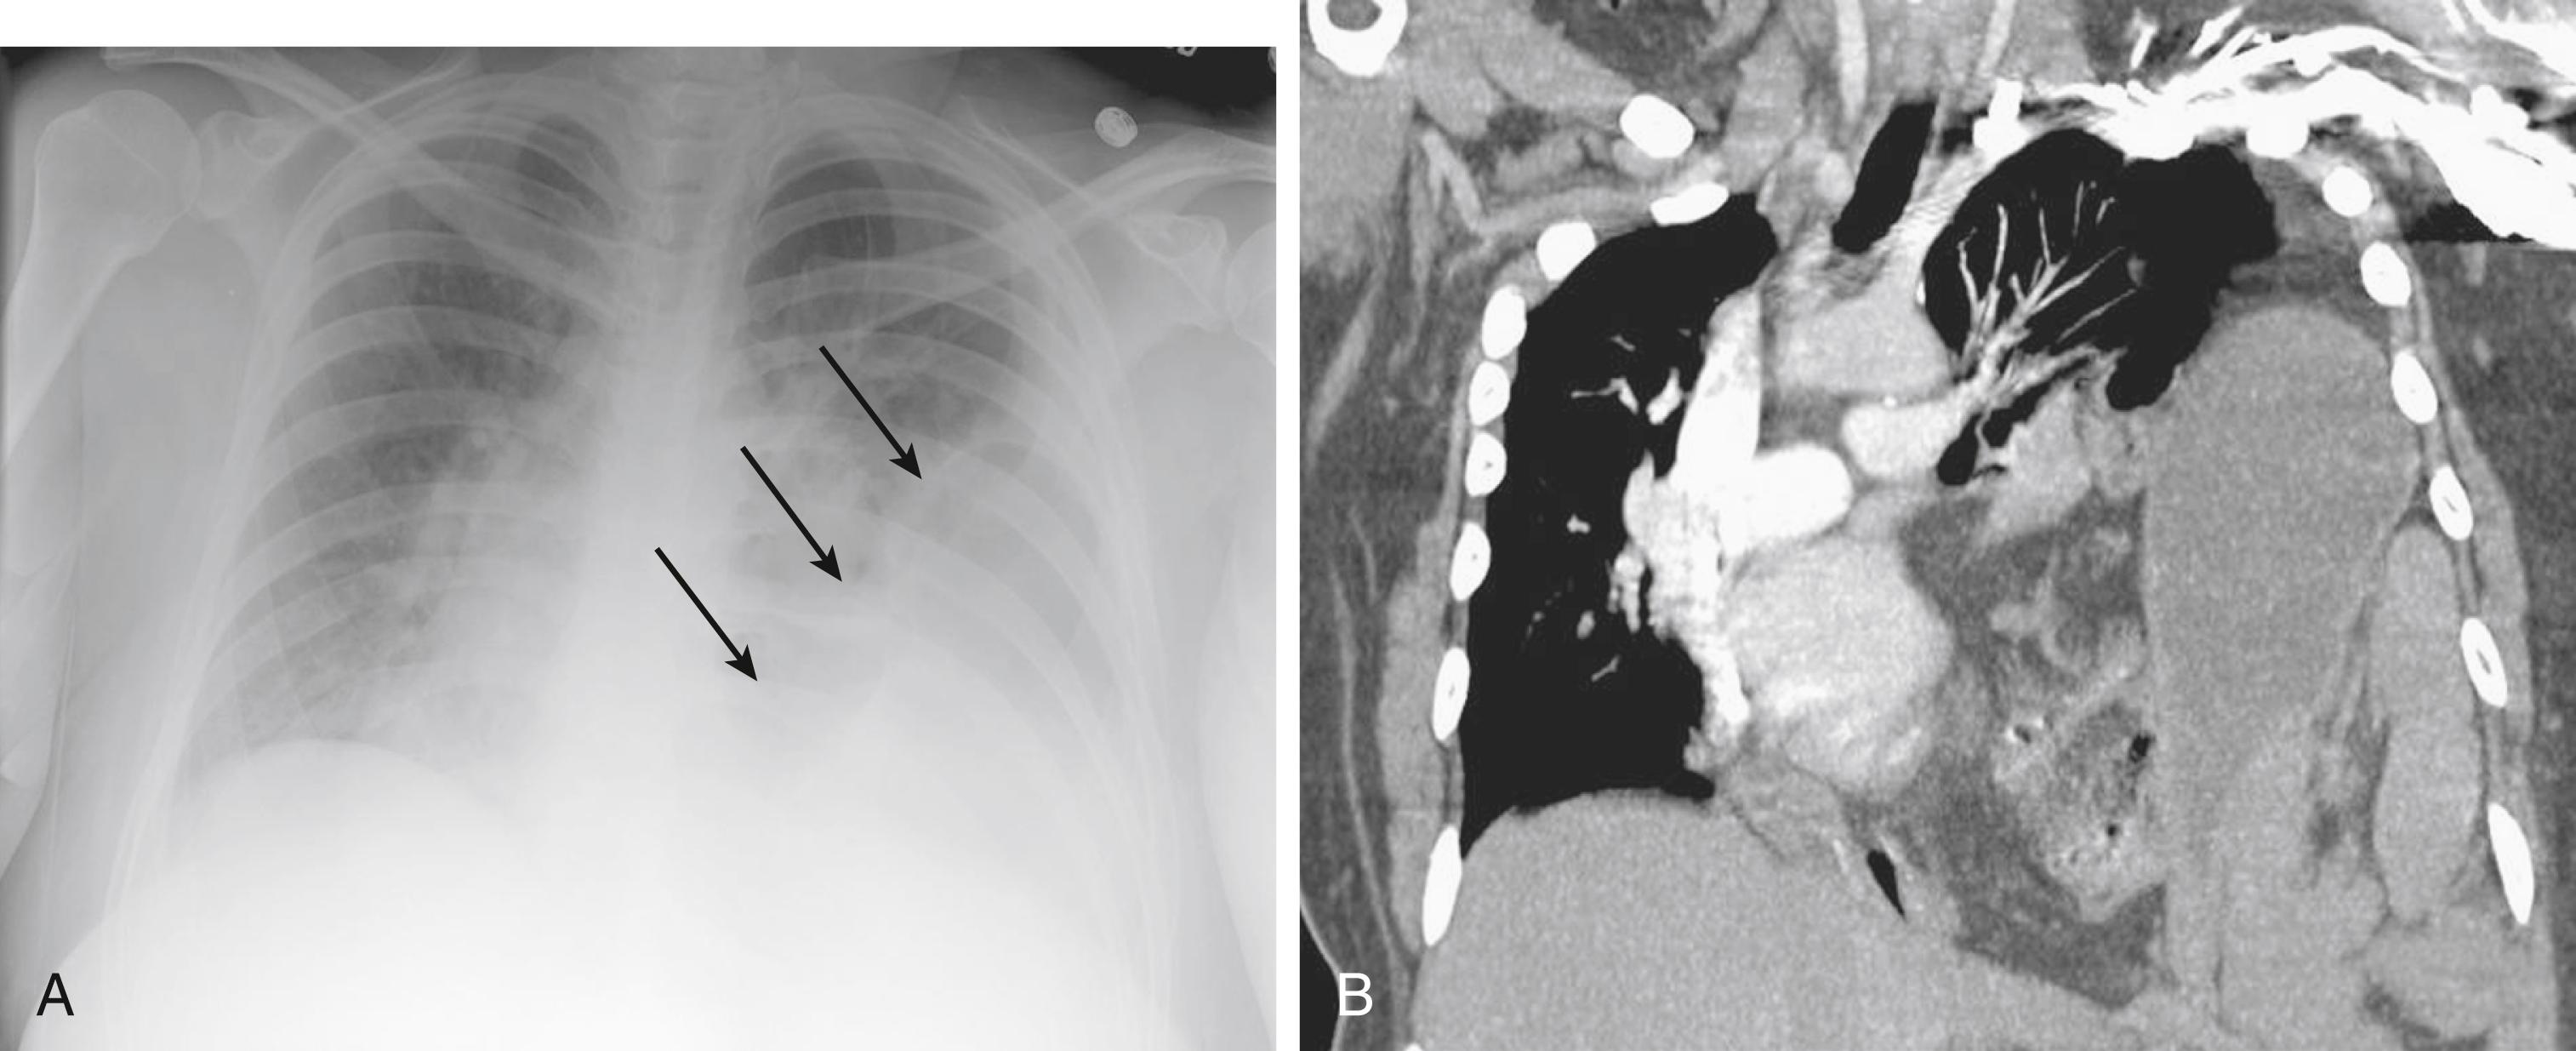 Fig. 27.3, Bochdalek hernia. A, This plain chest film shows a Bochdalek hernia as a small opacity in the posterior chest at the level of the diaphragm, with bowel in the left chest ( arrows ). B, CT of the same patient showing bowel above the diaphragm and causing a mediastinal shift.